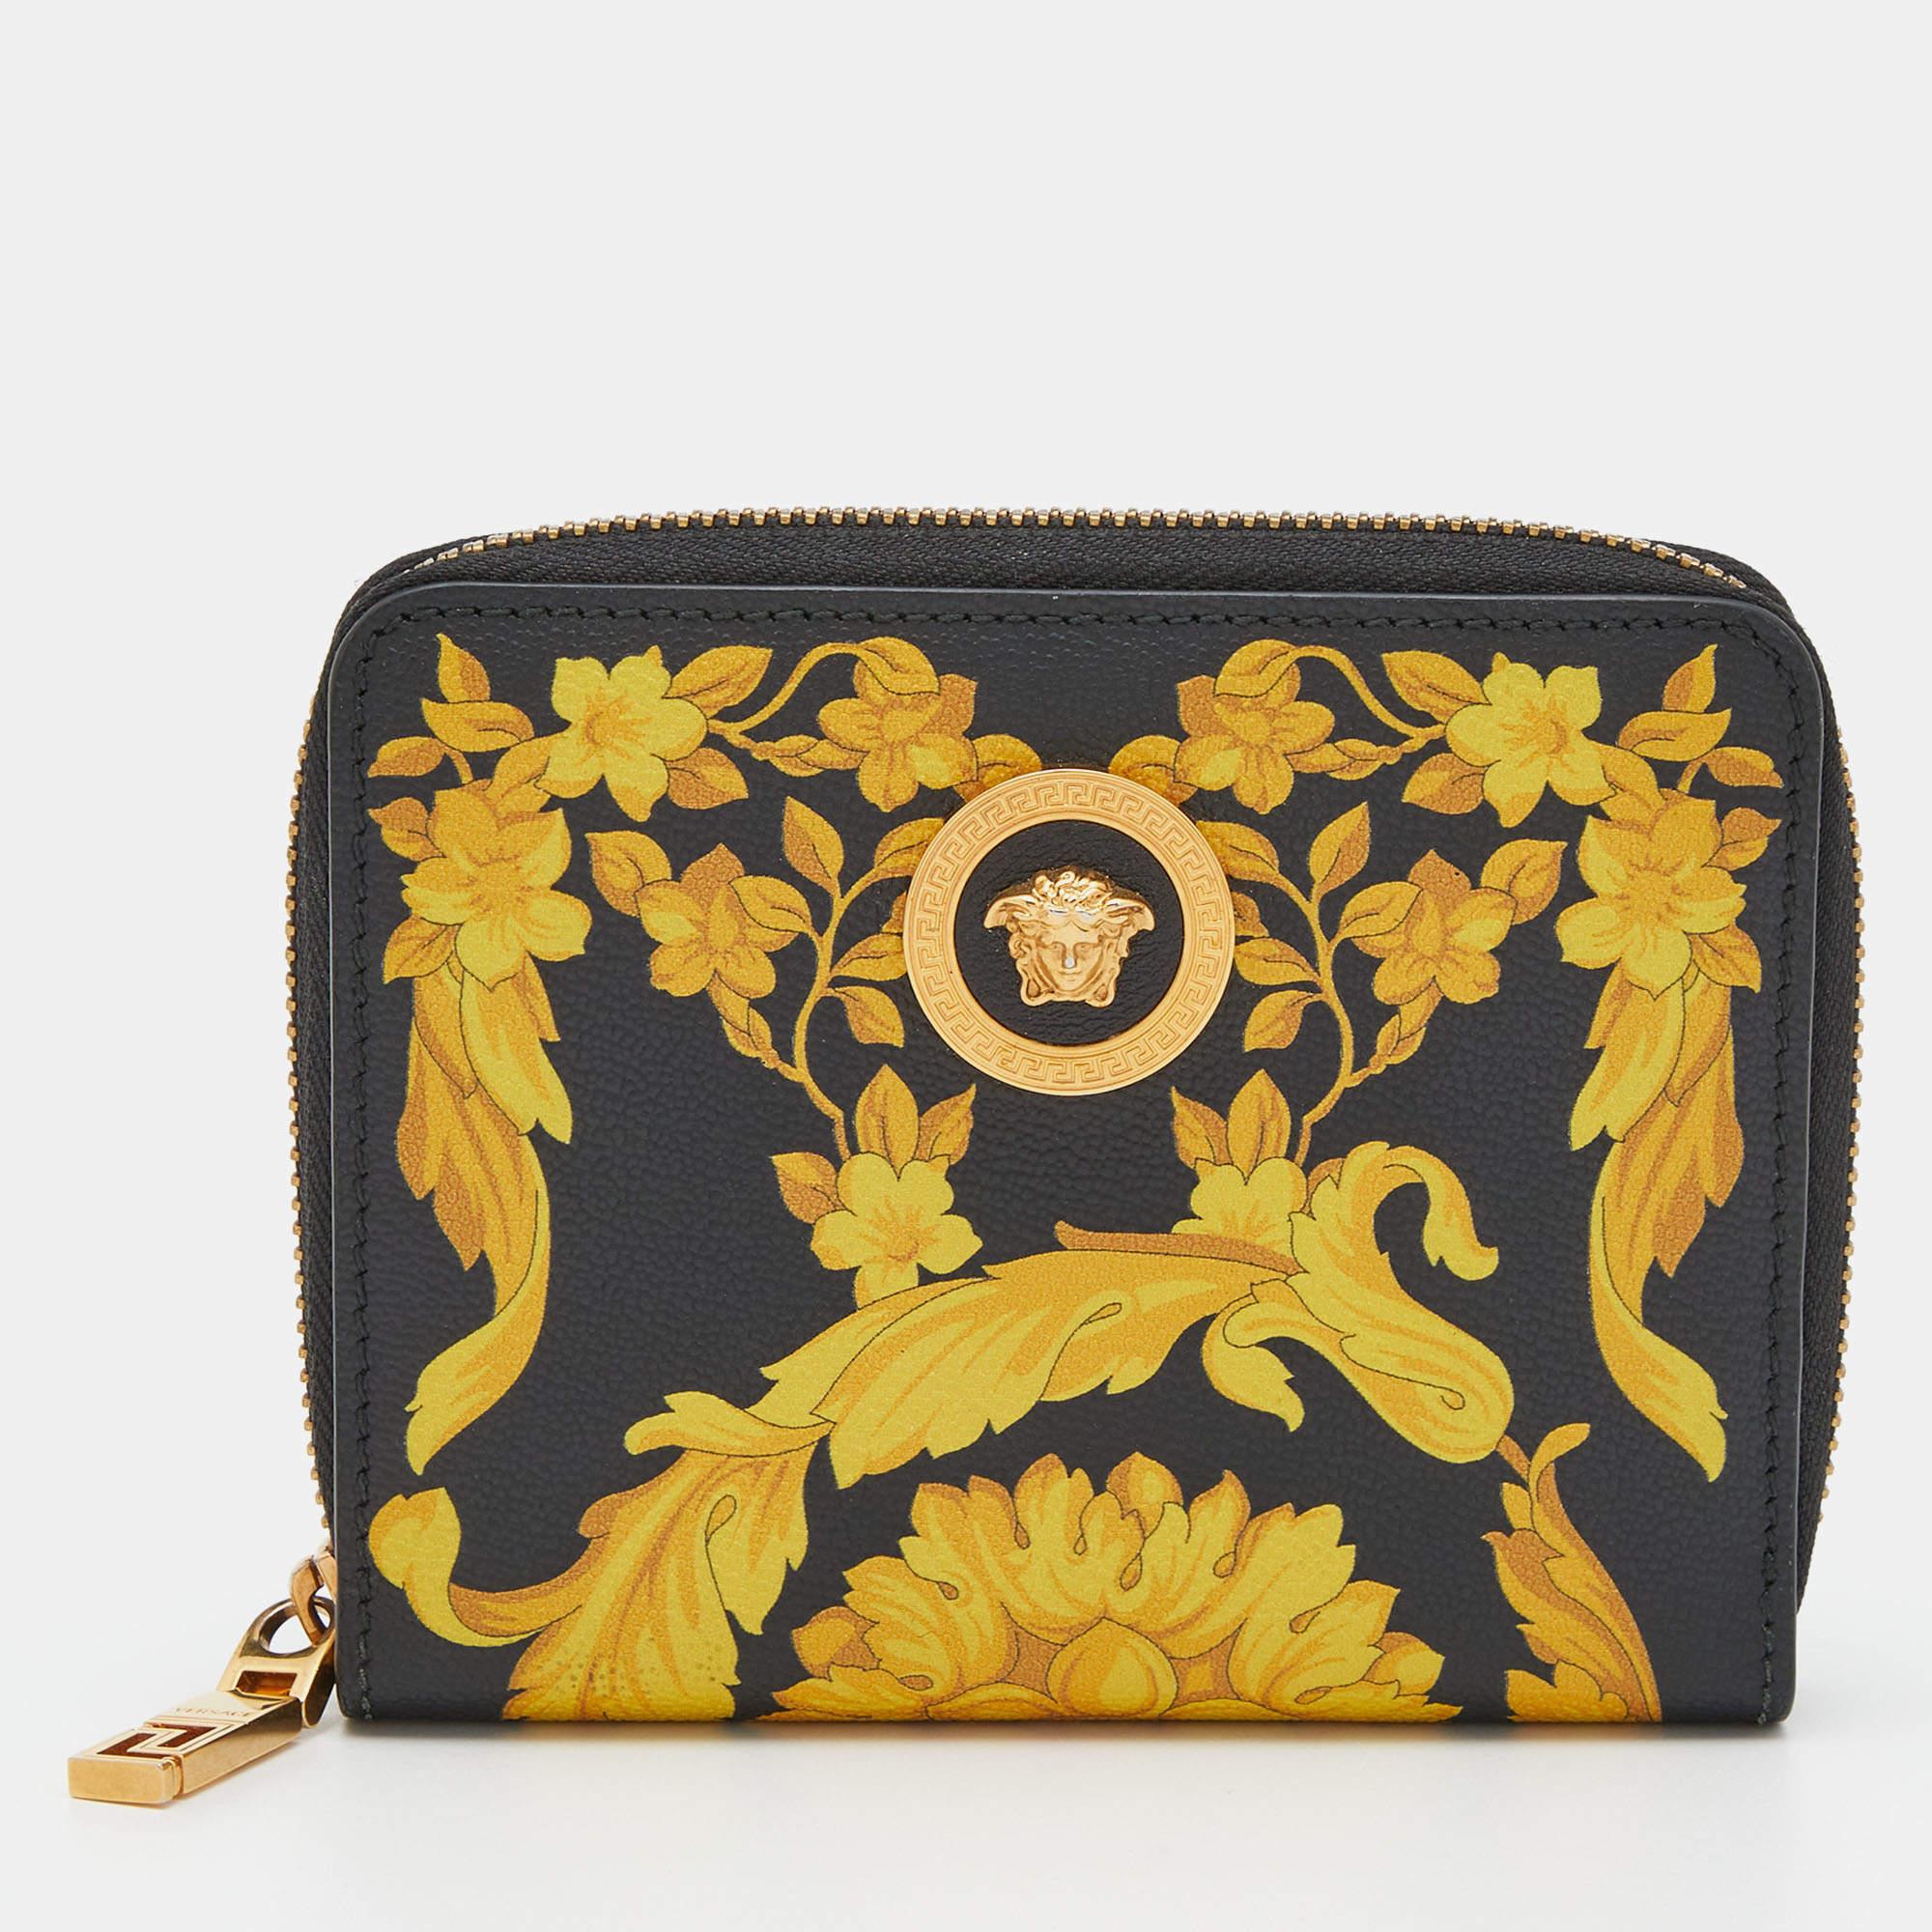 This Versace wallet is an immaculate balance of sophistication and rational utility. It has been designed using prime quality materials and elevated by a sleek finish. The creation is equipped with ample space for your monetary